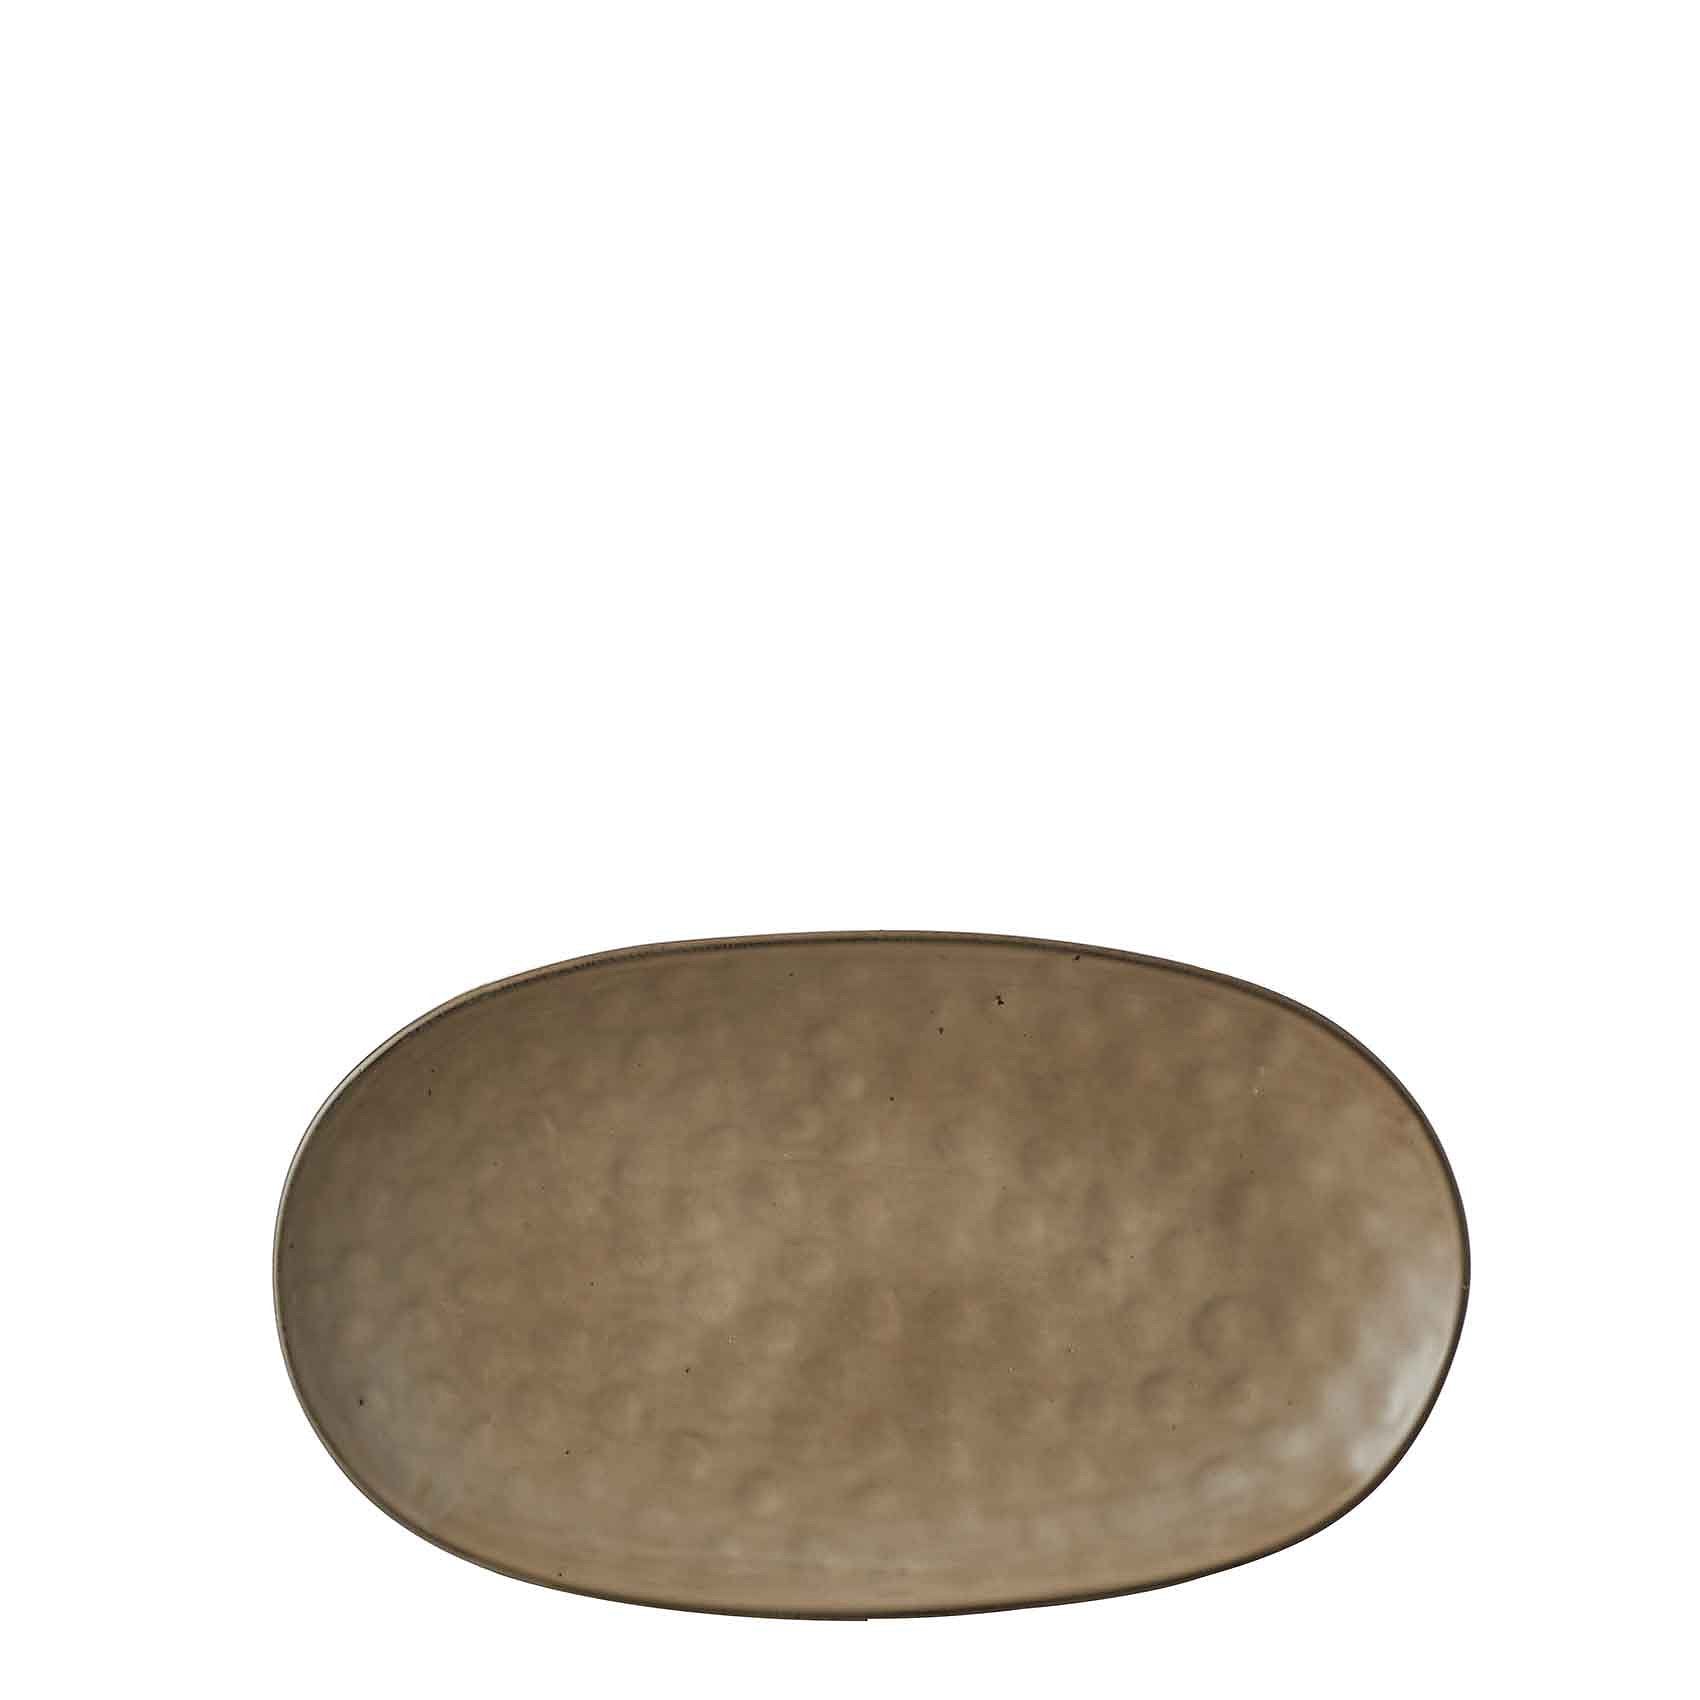 Mica Decorations tabo bord creme maat in cm: 31 x 18 x 3